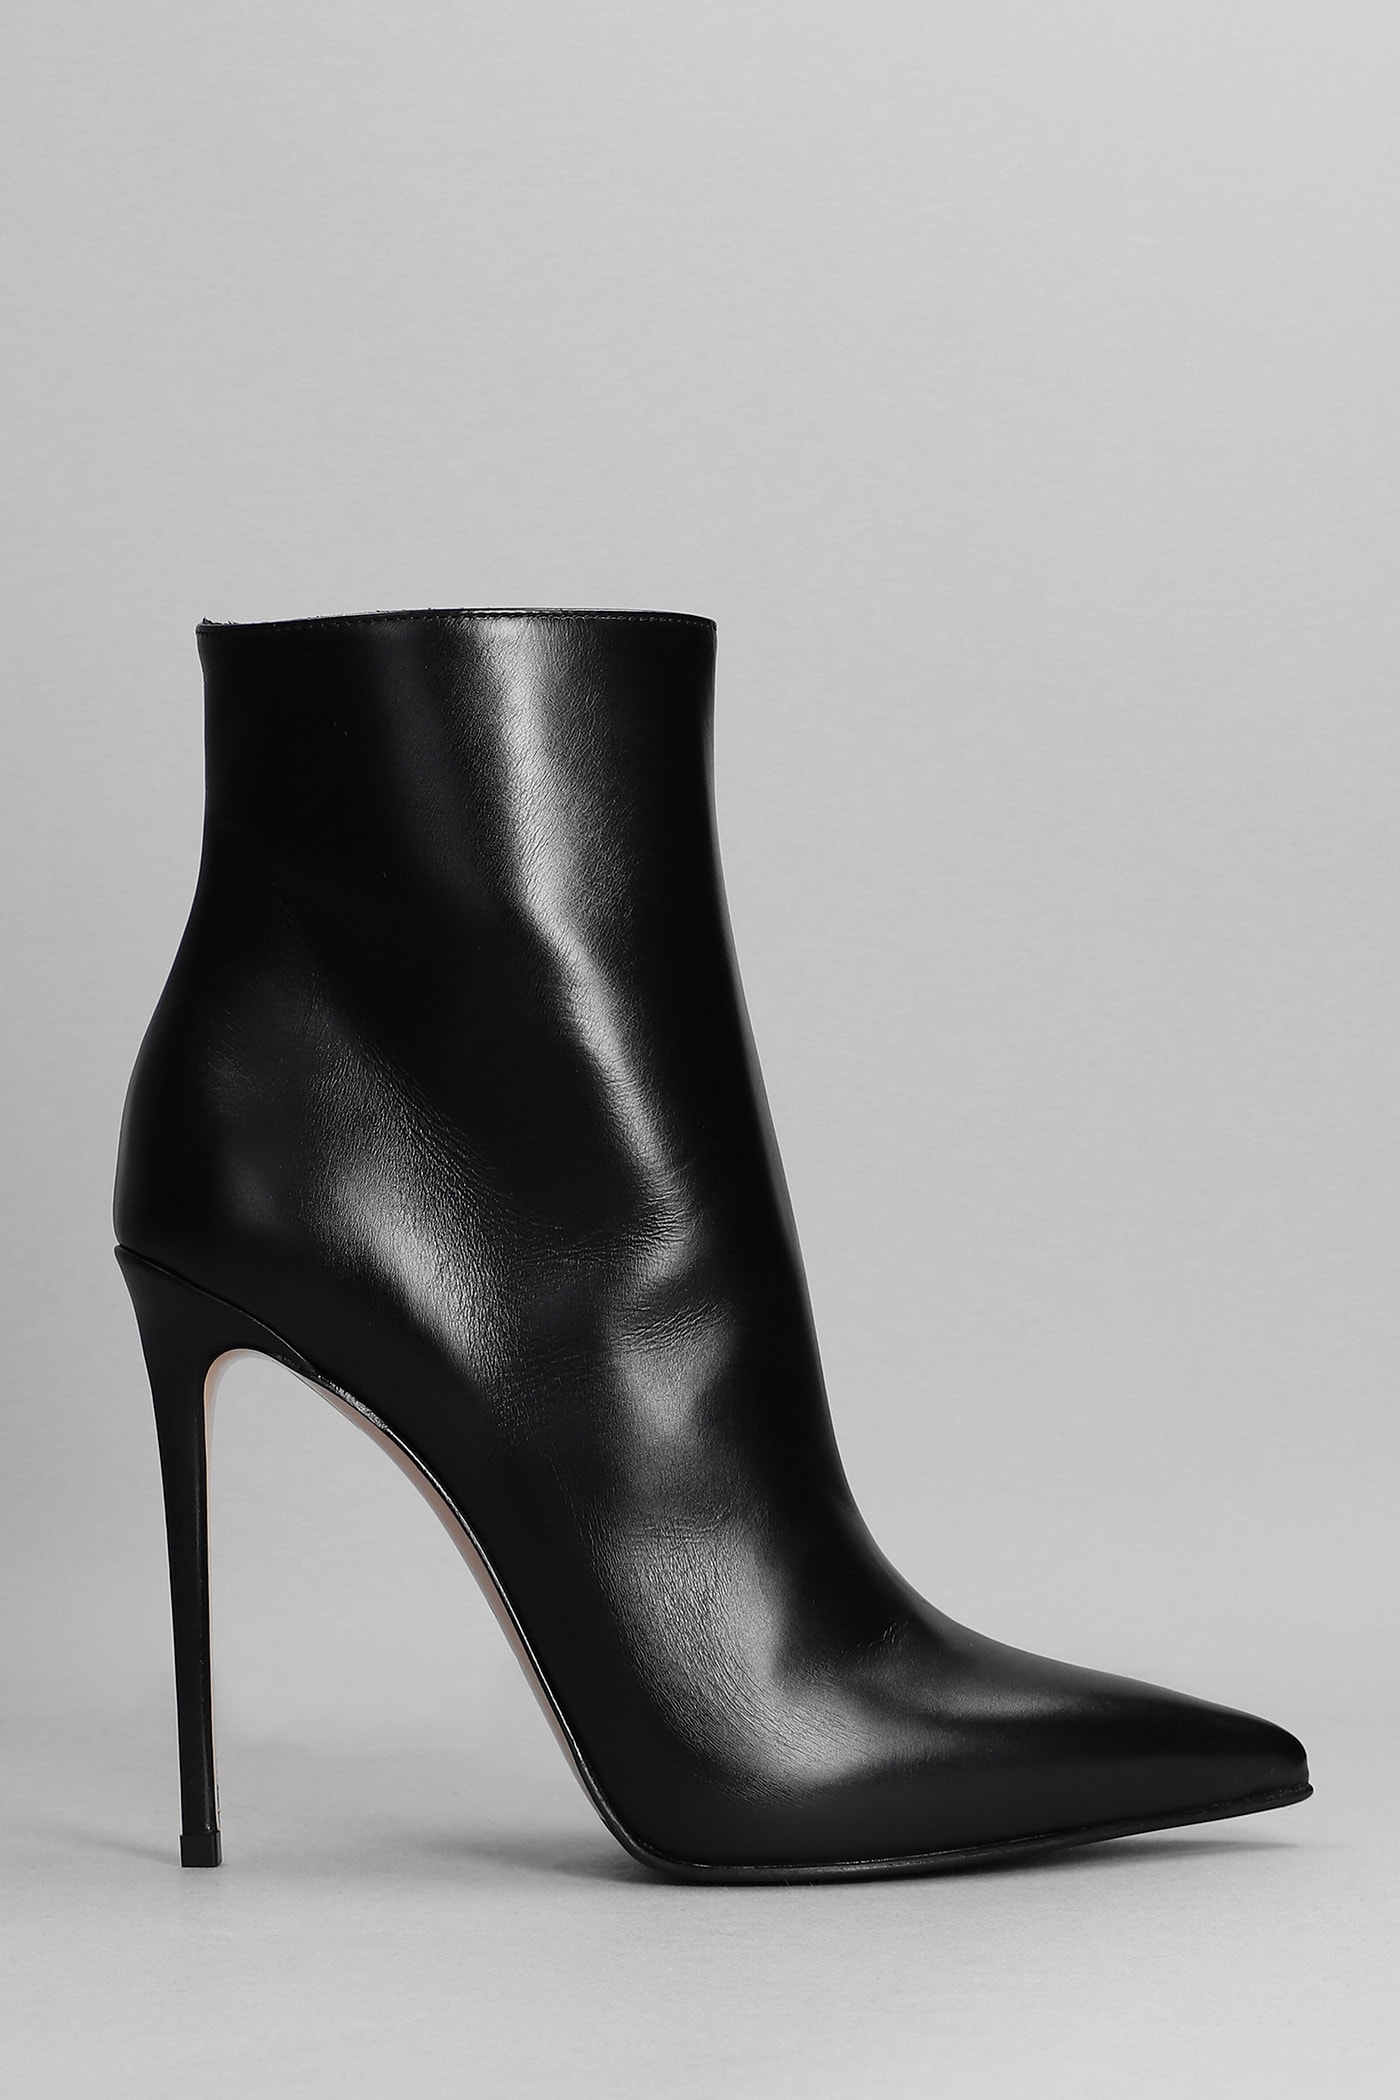 LE SILLA EVA 120 HIGH HEELS ANKLE BOOTS IN BLACK LEATHER